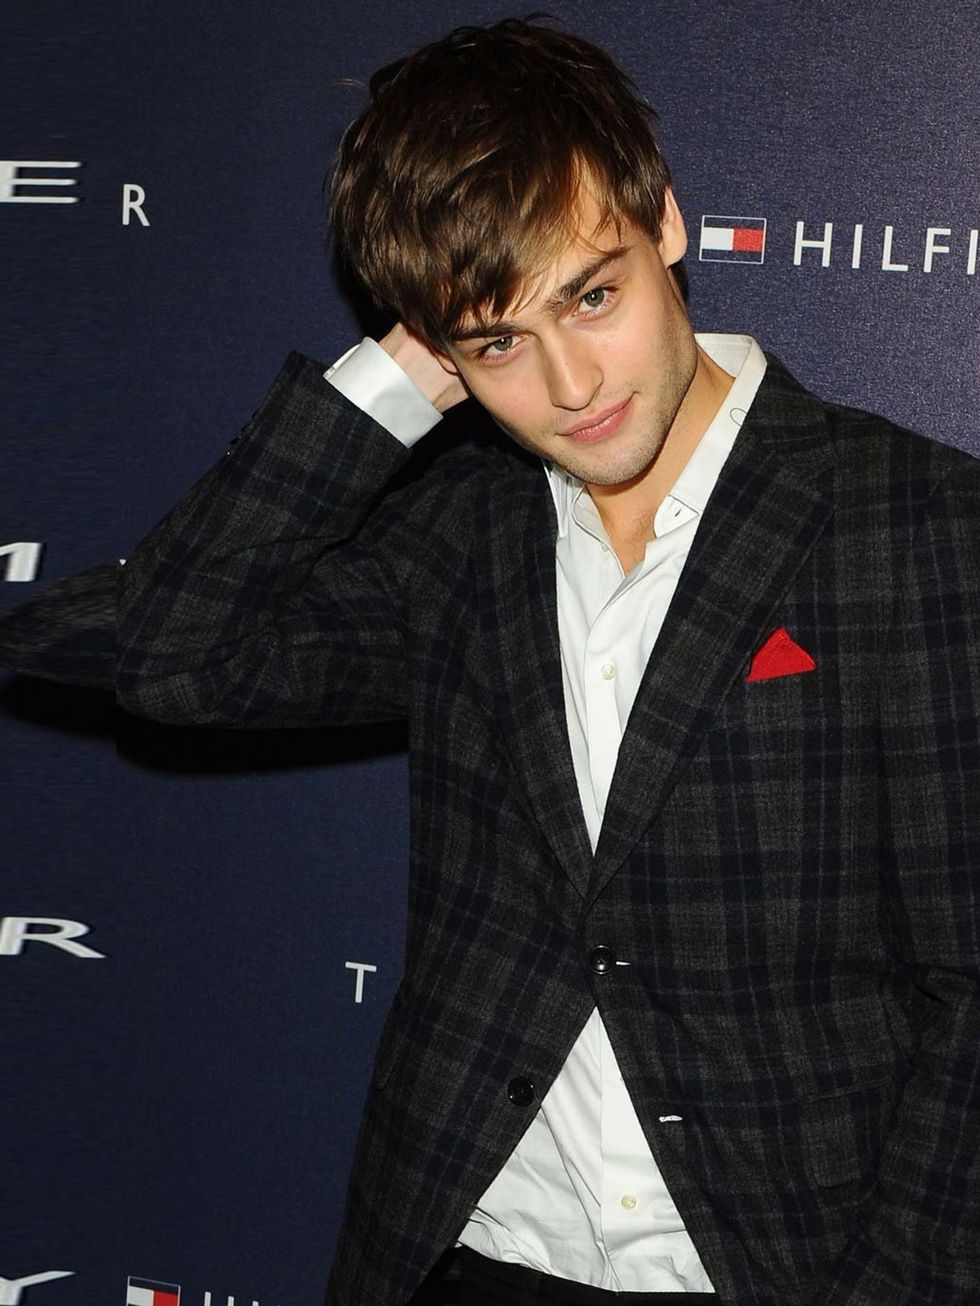 <p>My, my, my, what a pretty boy we have here. Sorry for sounding a bit creepy but <a href="http://www.elleuk.com/star-style/news/five-minutes-with-douglas-booth-romeo-and-juliet">Douglas Booths</a> face looks like its been made by tiny angel-fairies in